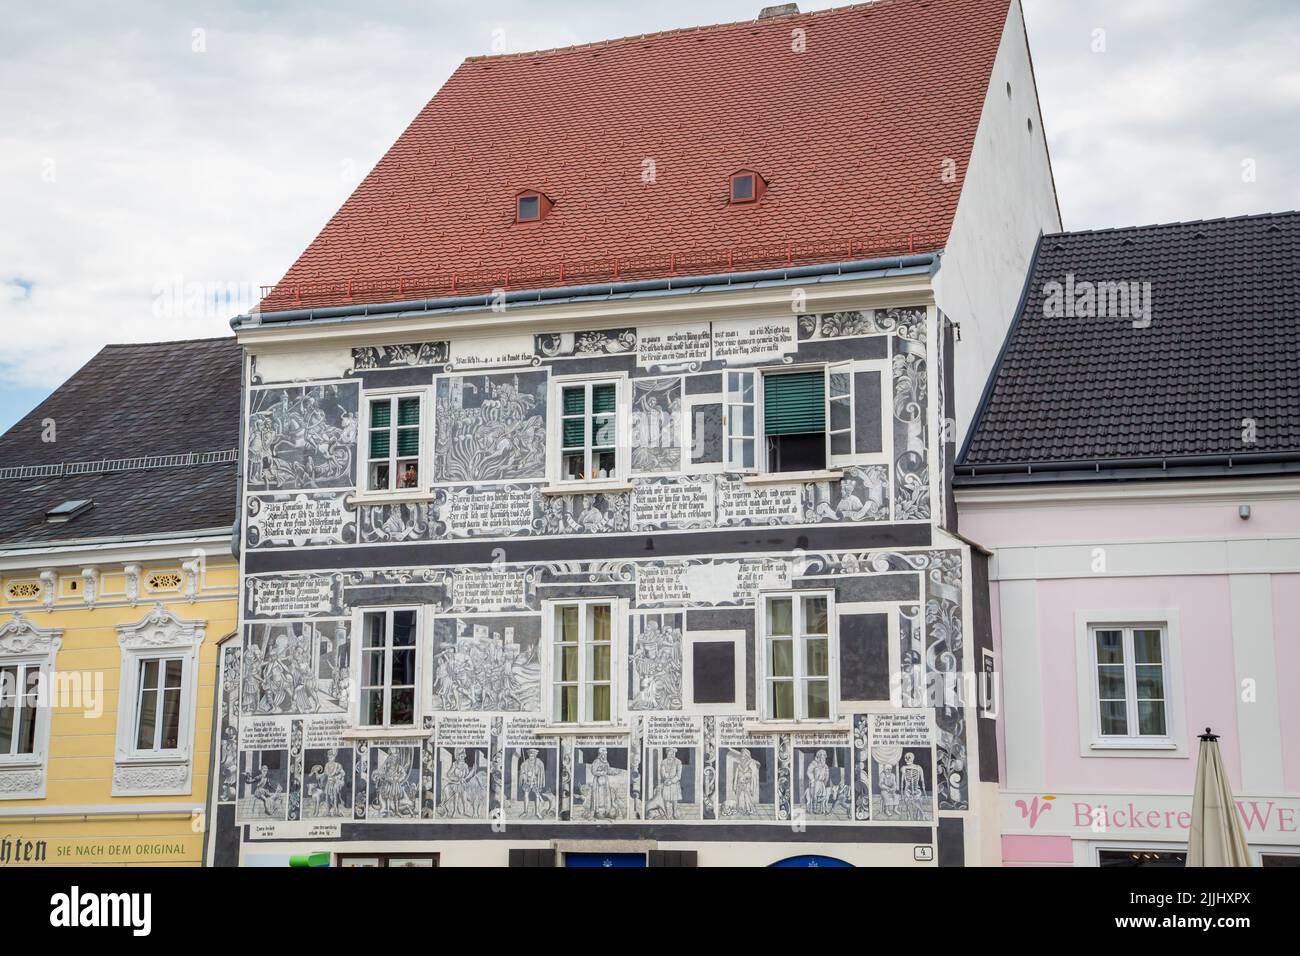 Sgraffito house in Weitra/ Waldviertel, the oldest brewery town of Austria Stock Photo